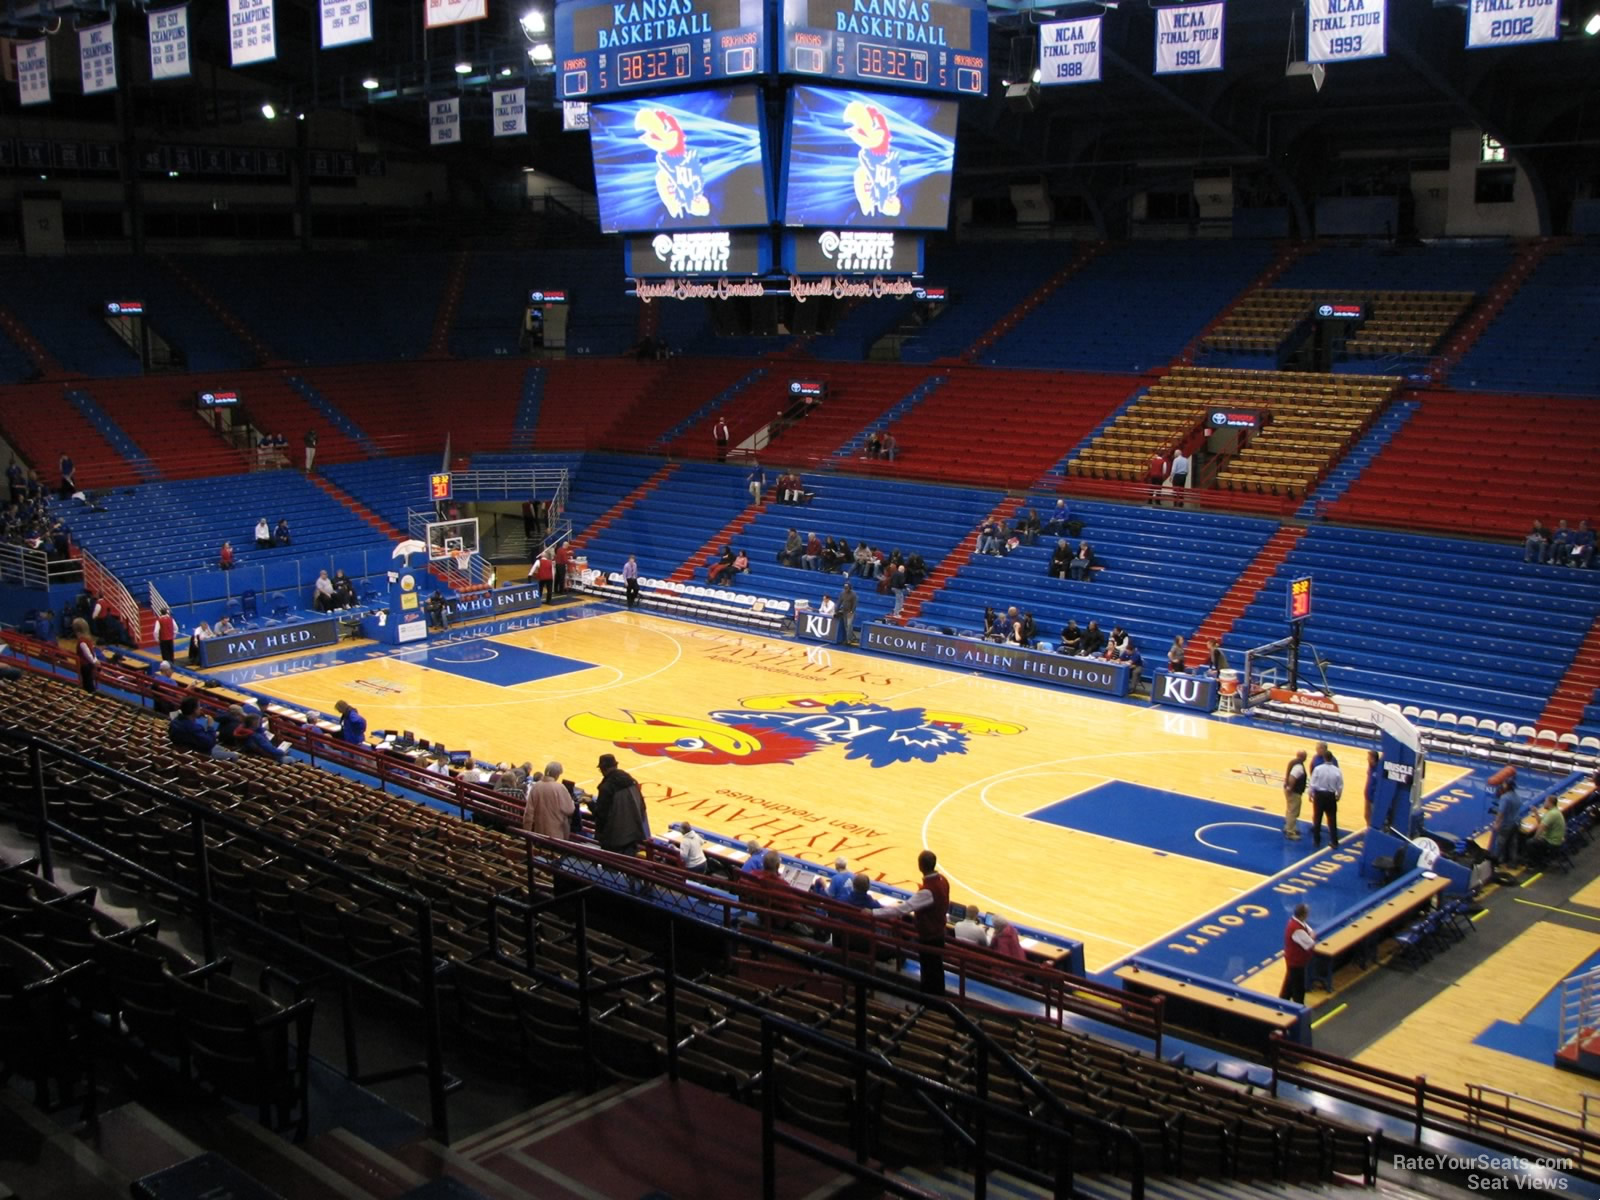 section 4, row 18 seat view  - allen fieldhouse